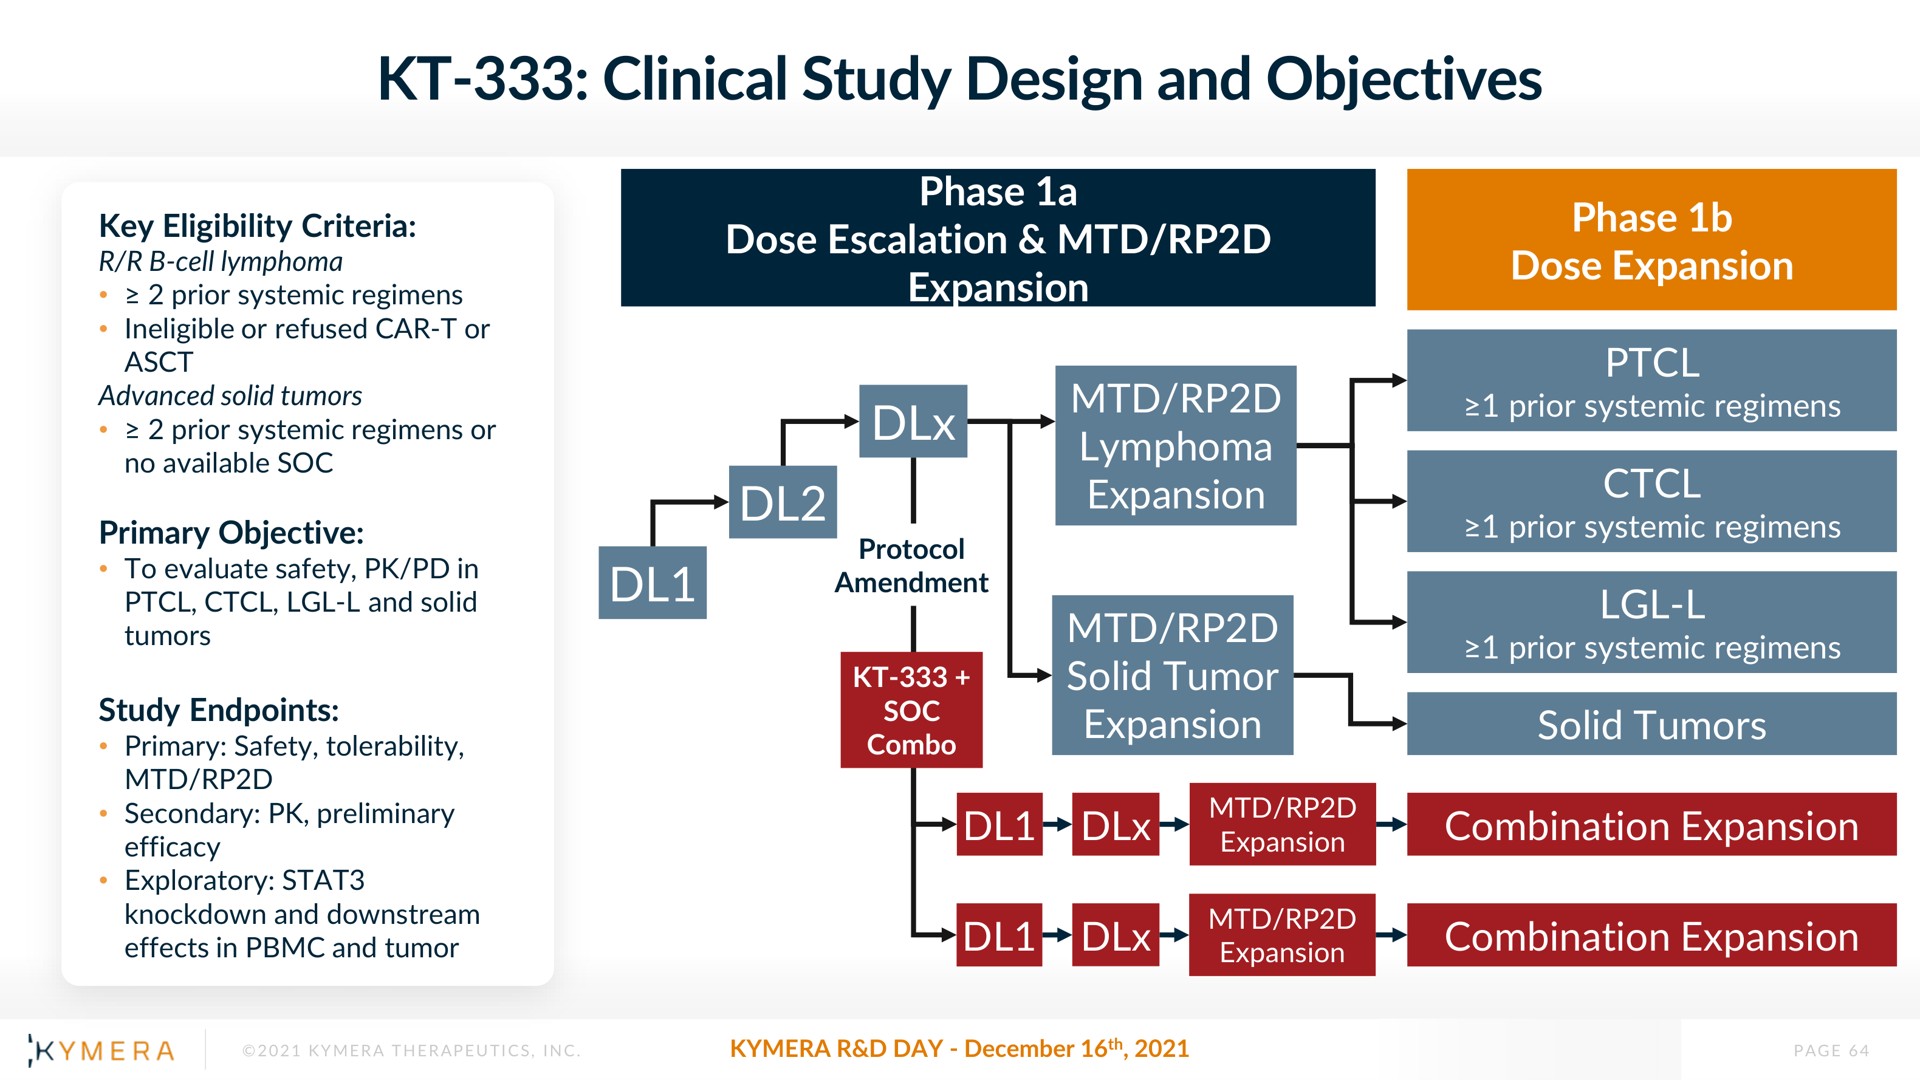 clinical study design and objectives | Kymera